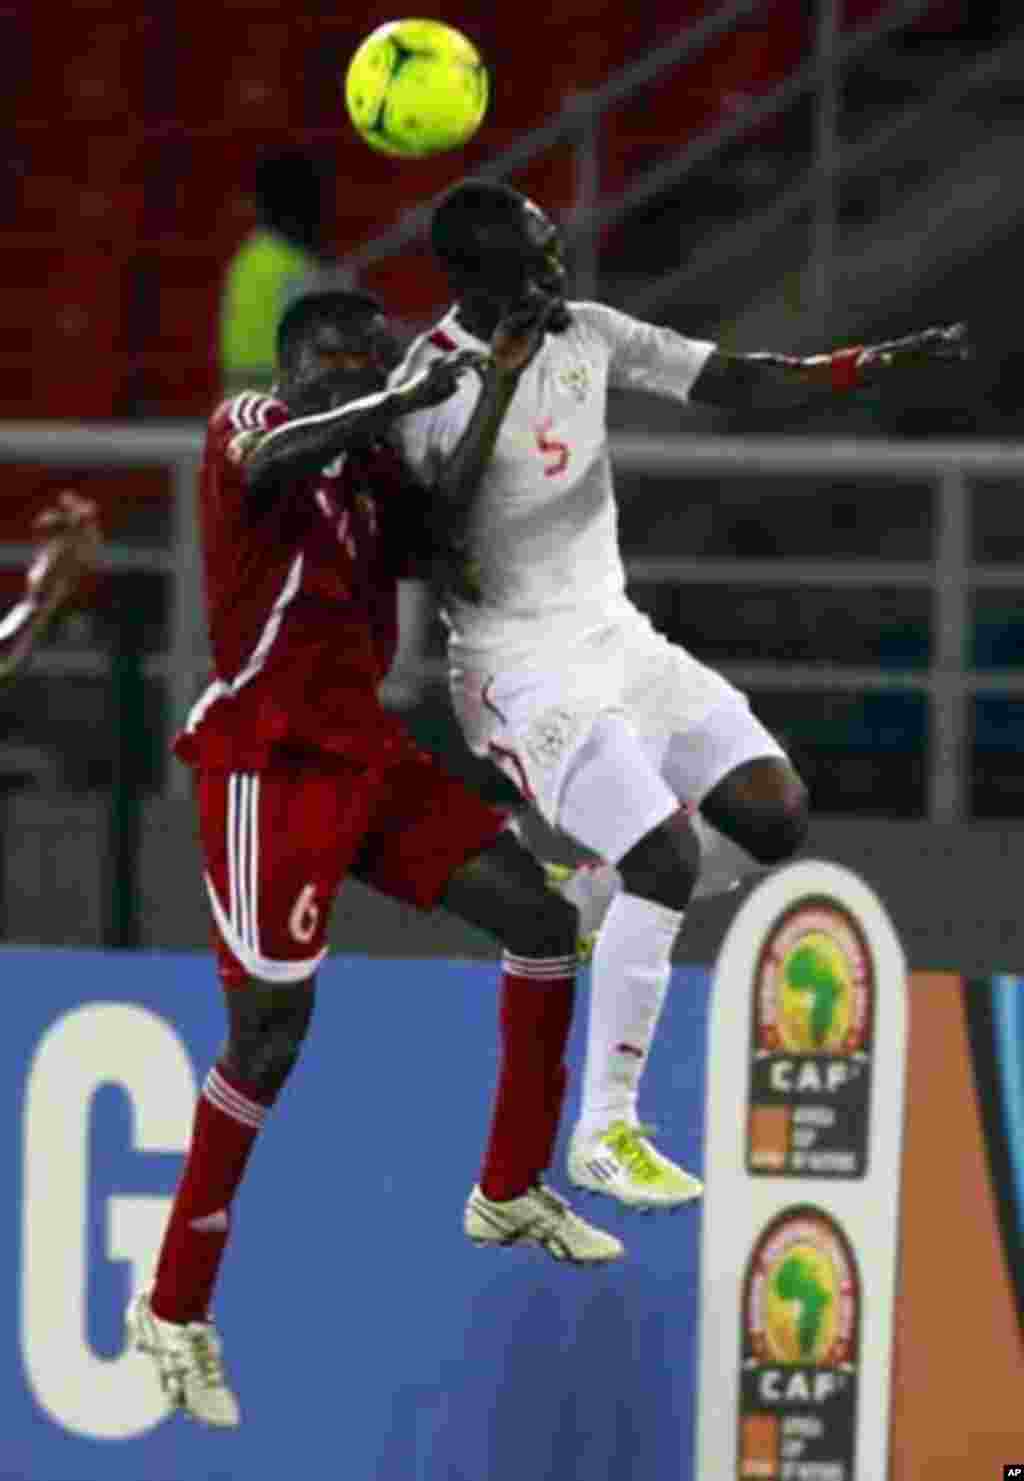 Mohamed Koffi of Burkina Faso (R) fights for the ball with Mosaab Omar of Sudan during their African Nations Cup Group B soccer match at Estadio de Bata "Bata Stadium", in Bata January 30, 2012.